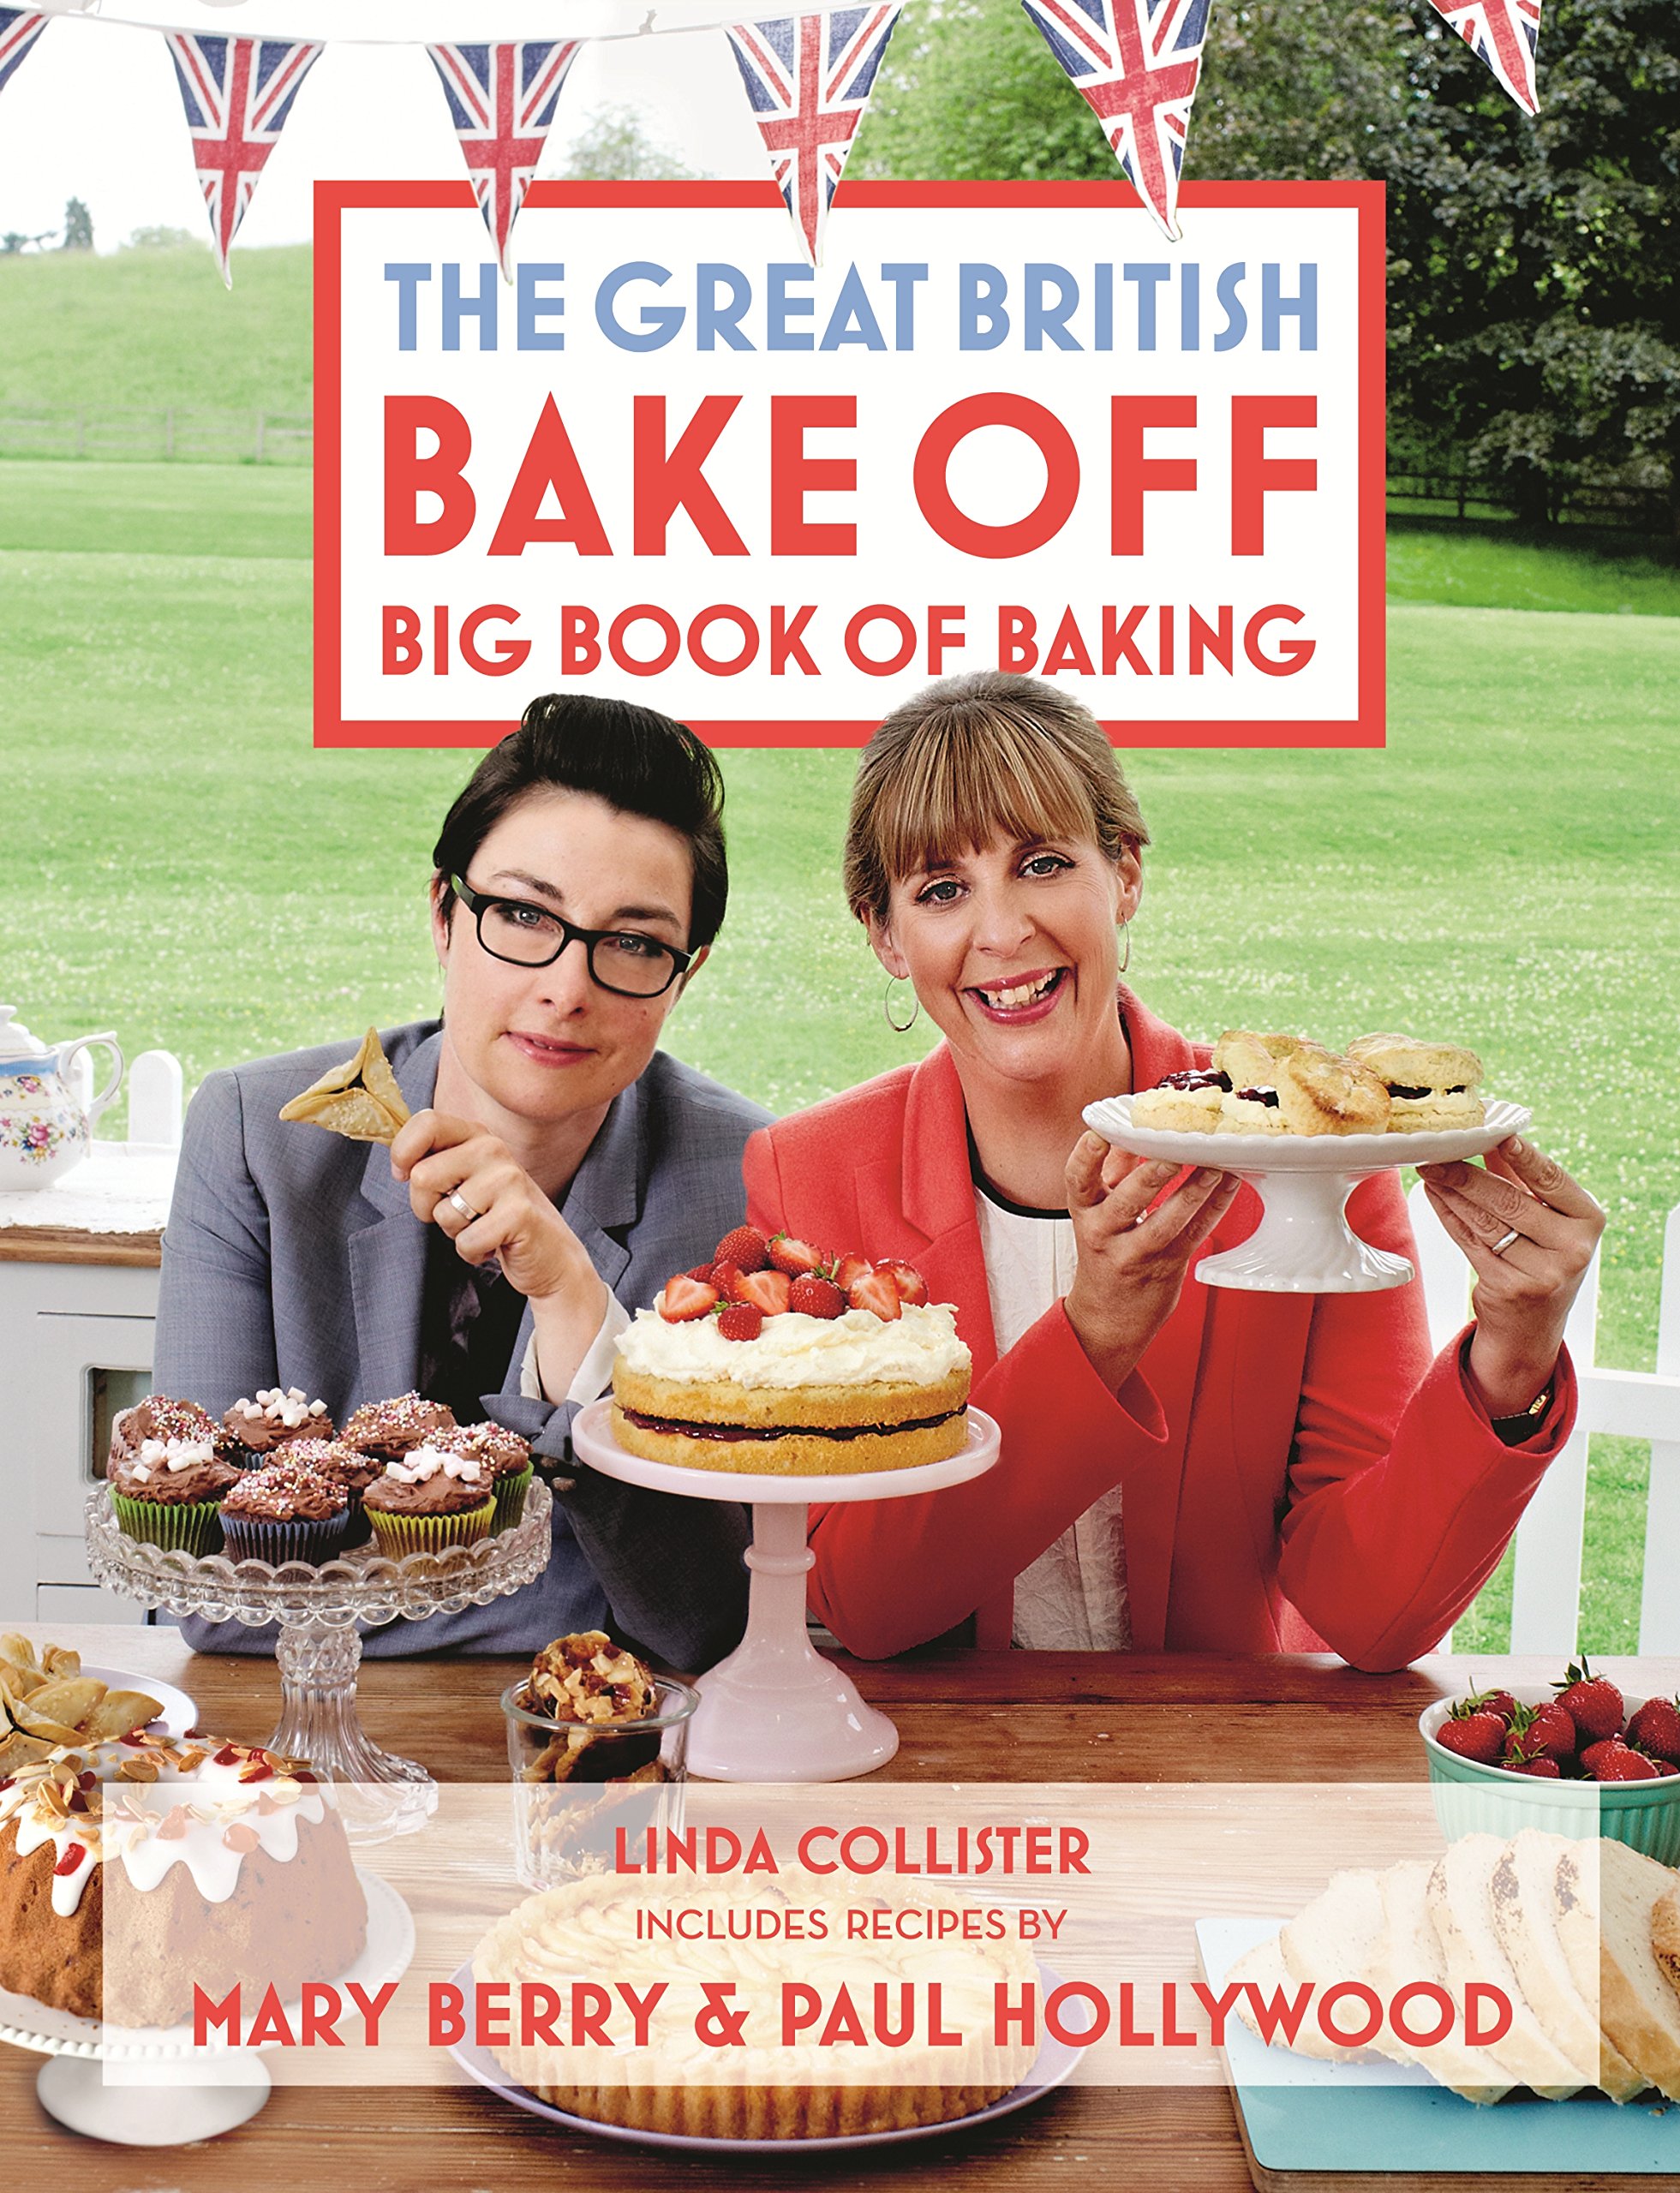 Shop The Great British Bake Off The Great British Bake Off